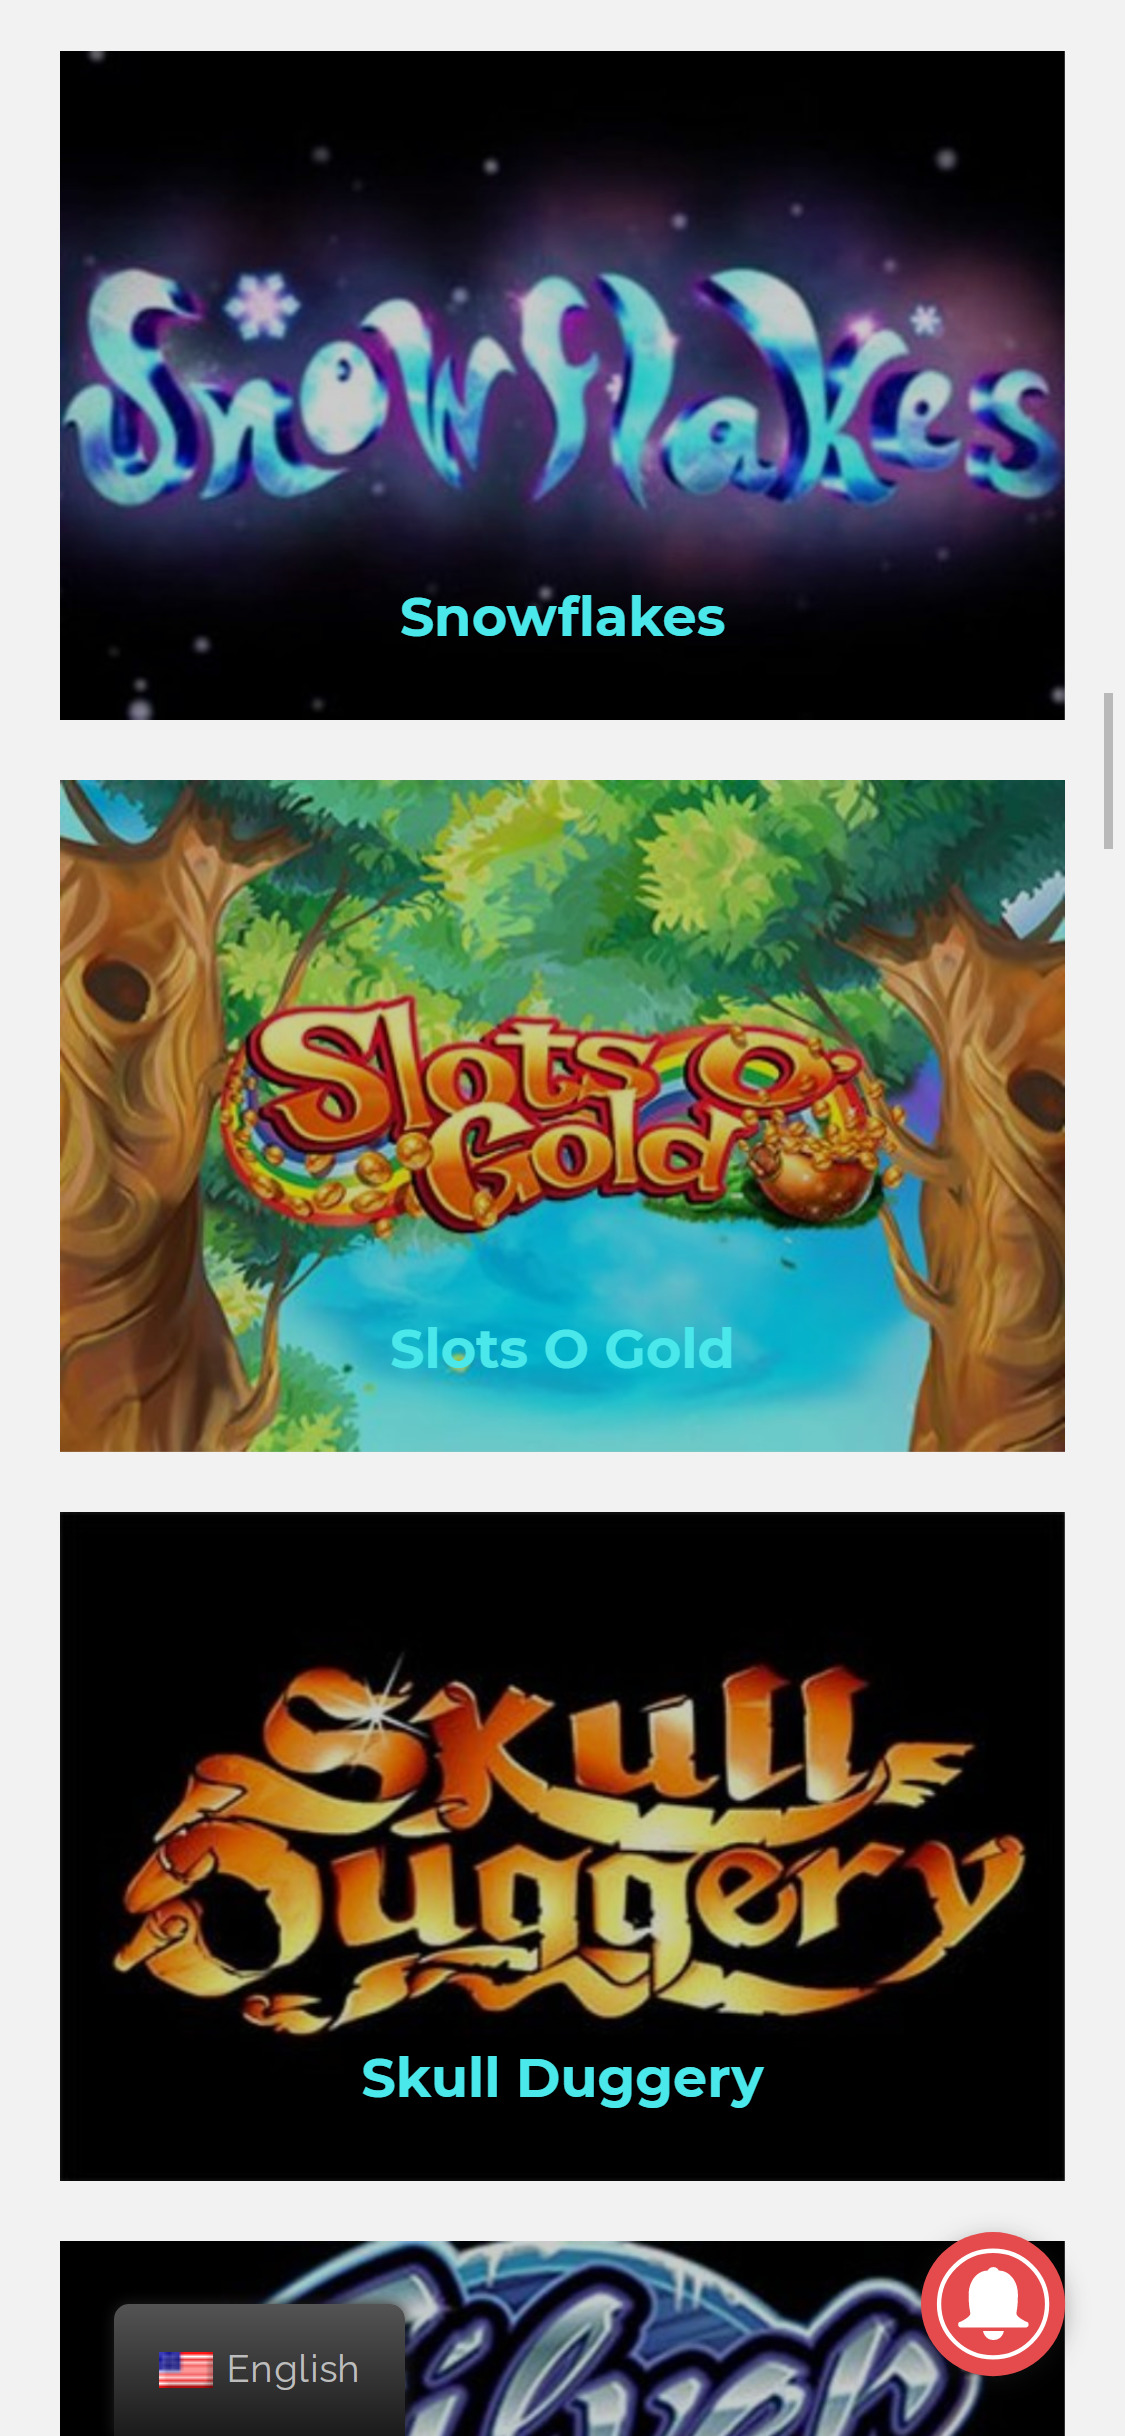 CoolPlay Casino Mobile Games Review